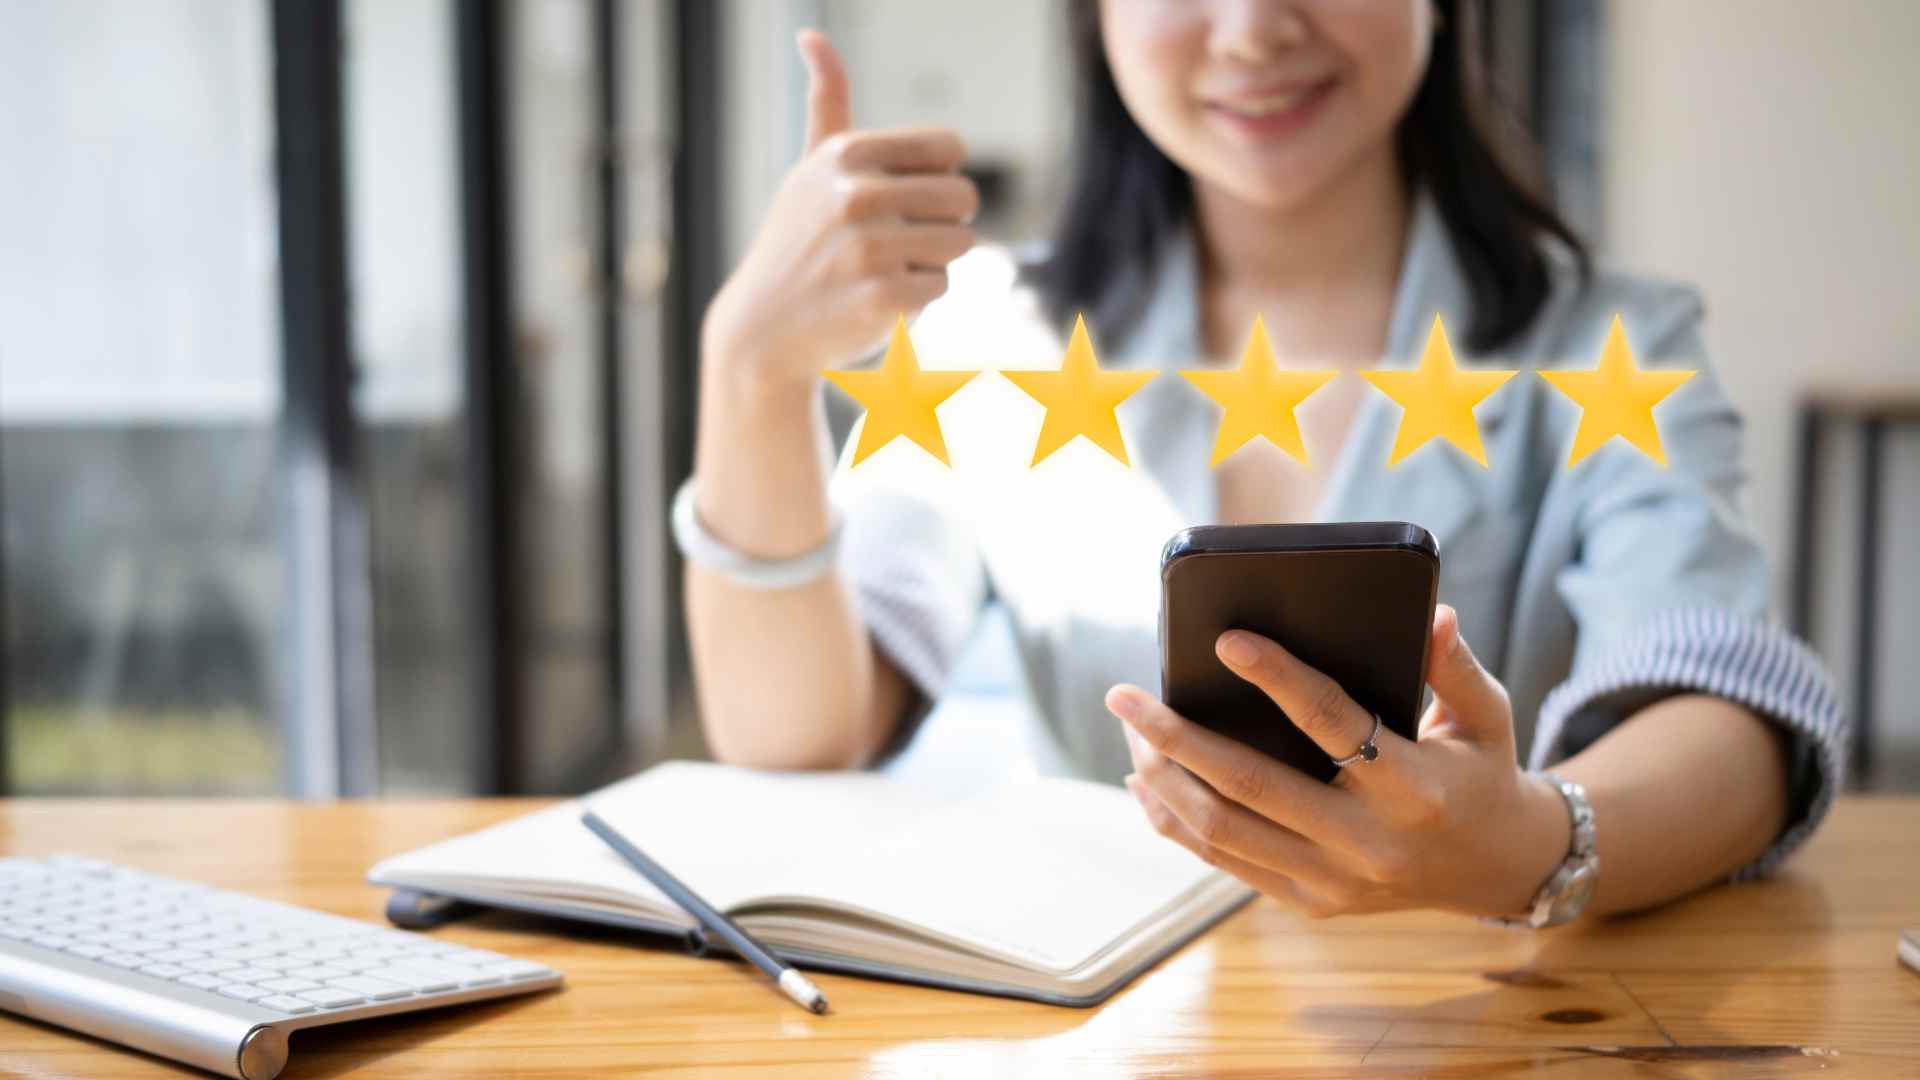 Early Reviewer Program: Amazon's NEW review program